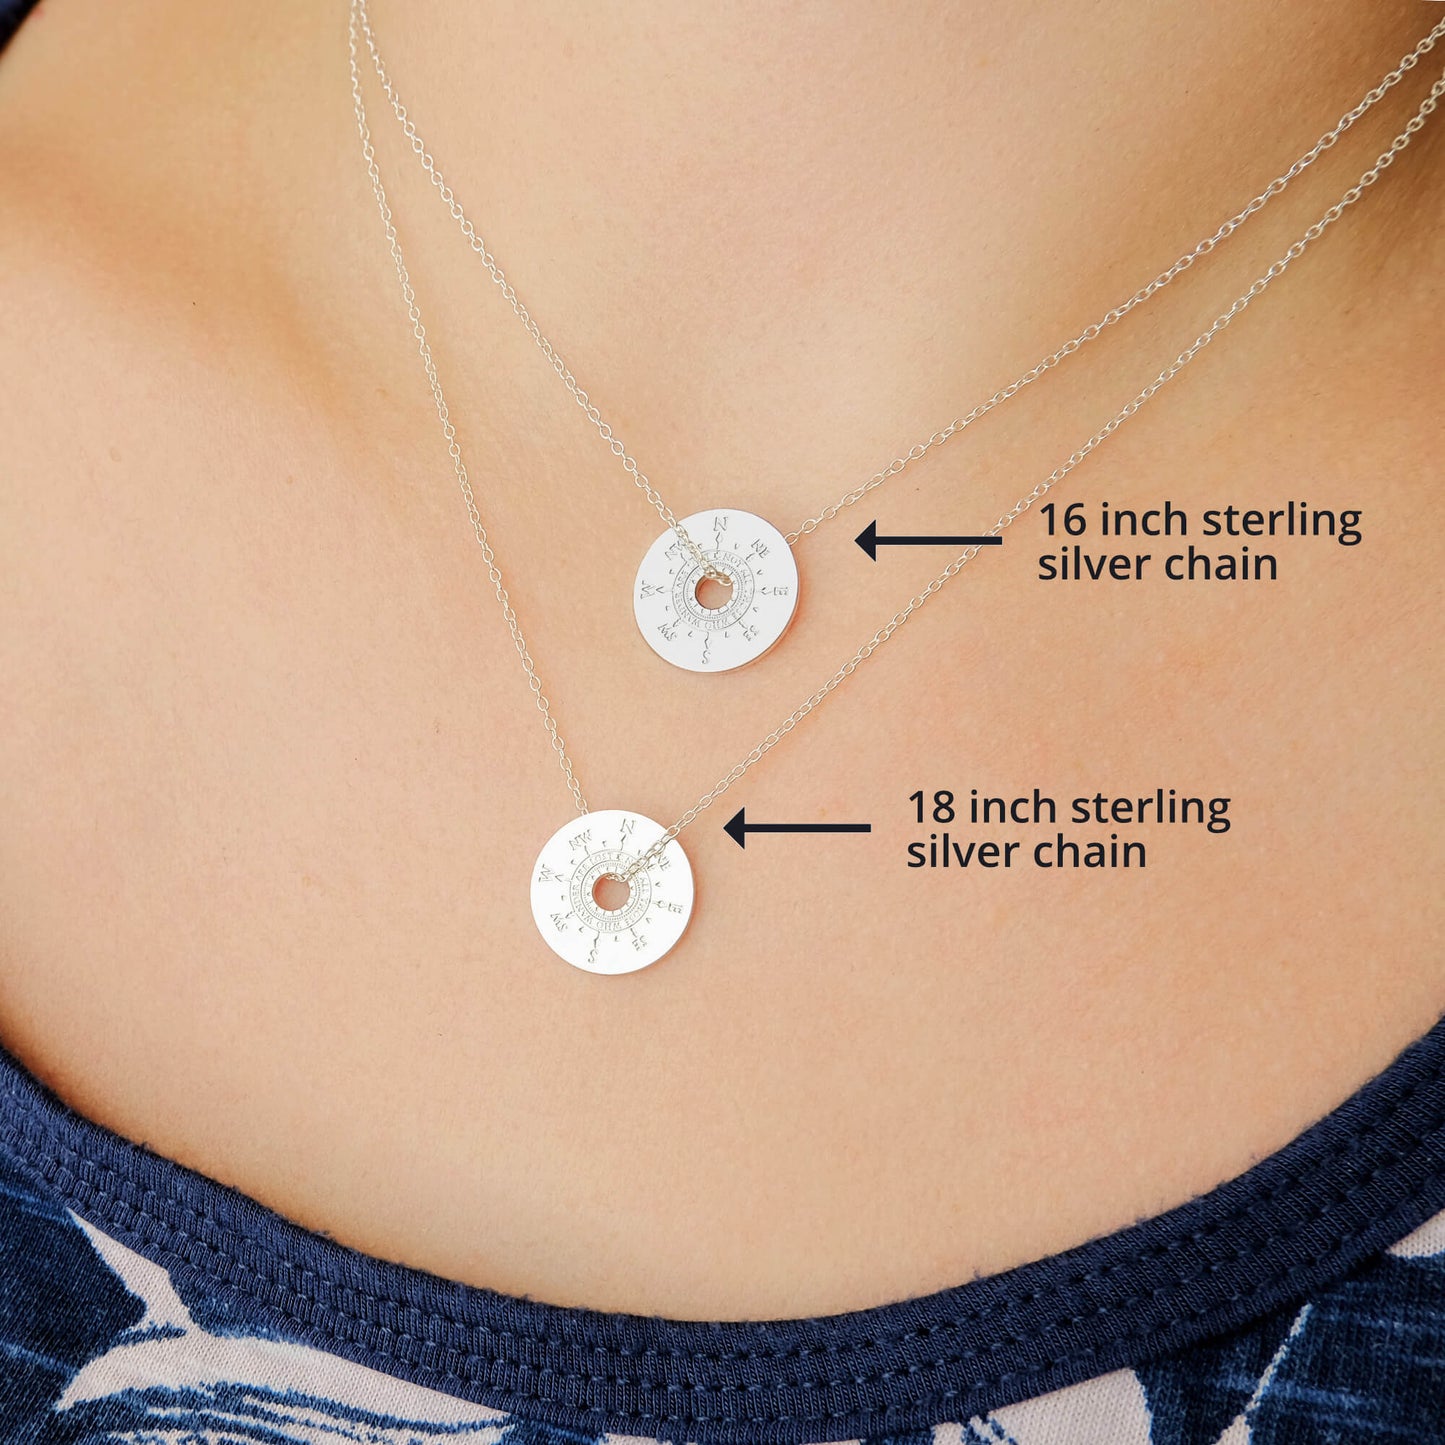 Silver Compass Necklace - Where to Next?